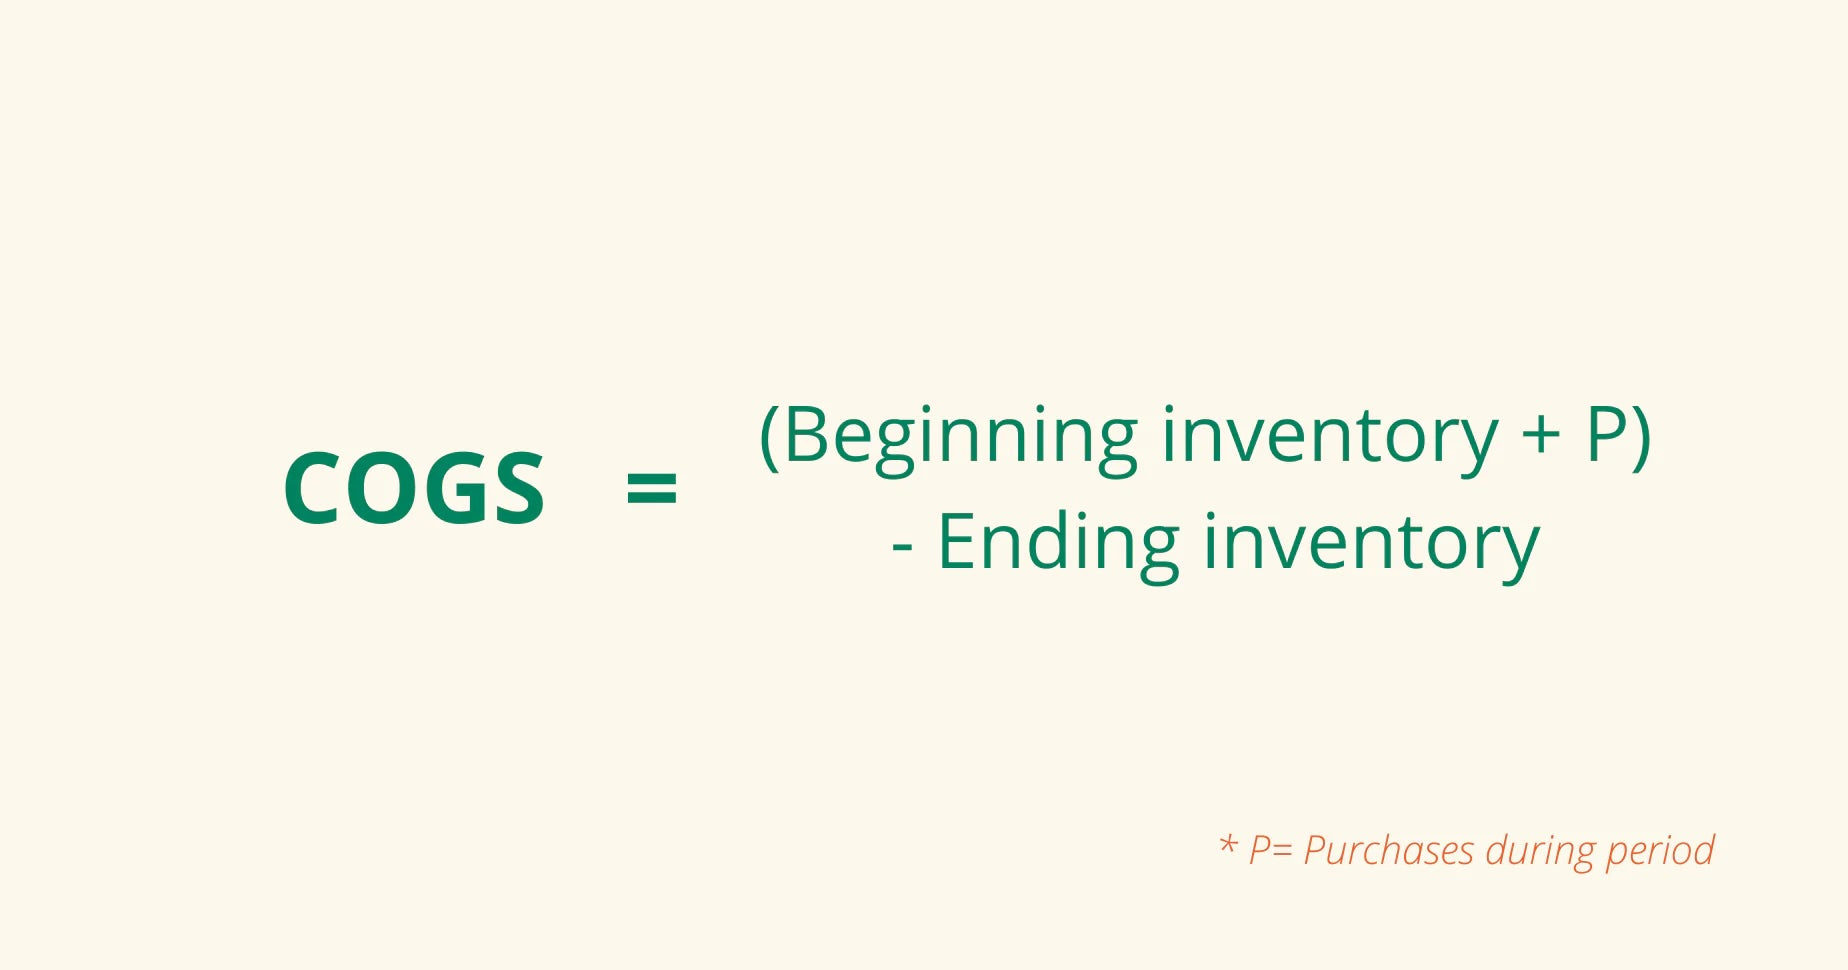 COGS = (beginning inventory + purchases) — ending inventory.